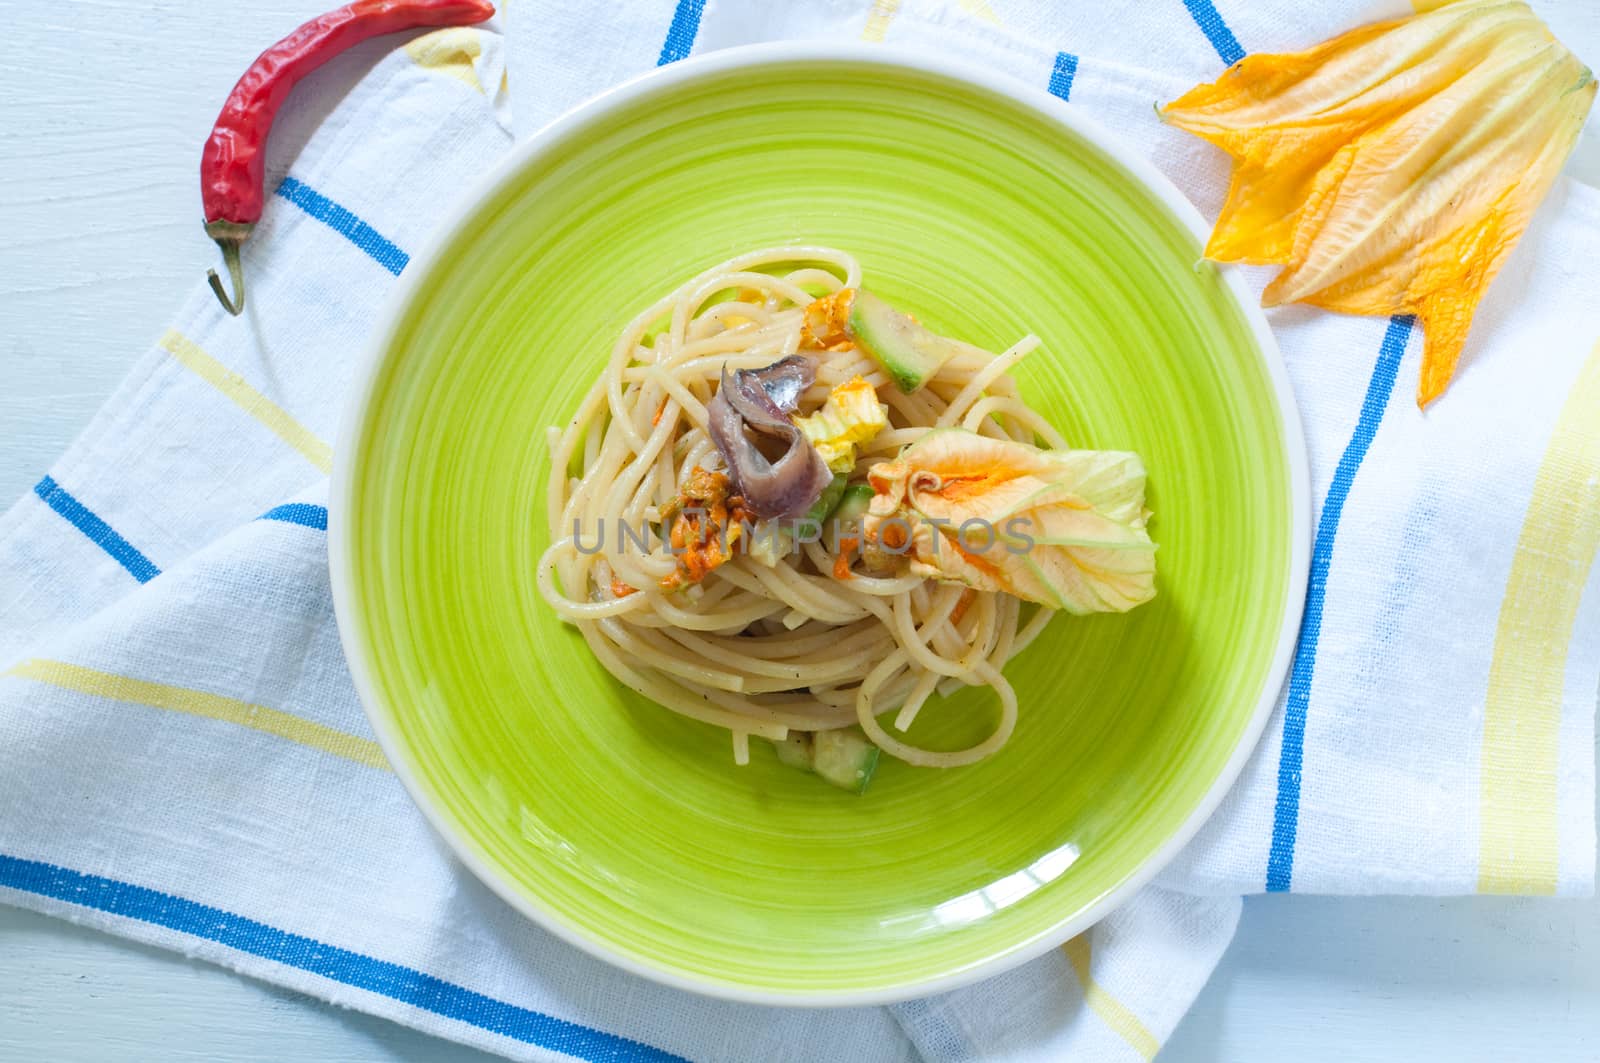 Spaghetti with marinated anchovy, zucchini and zucchini flowers